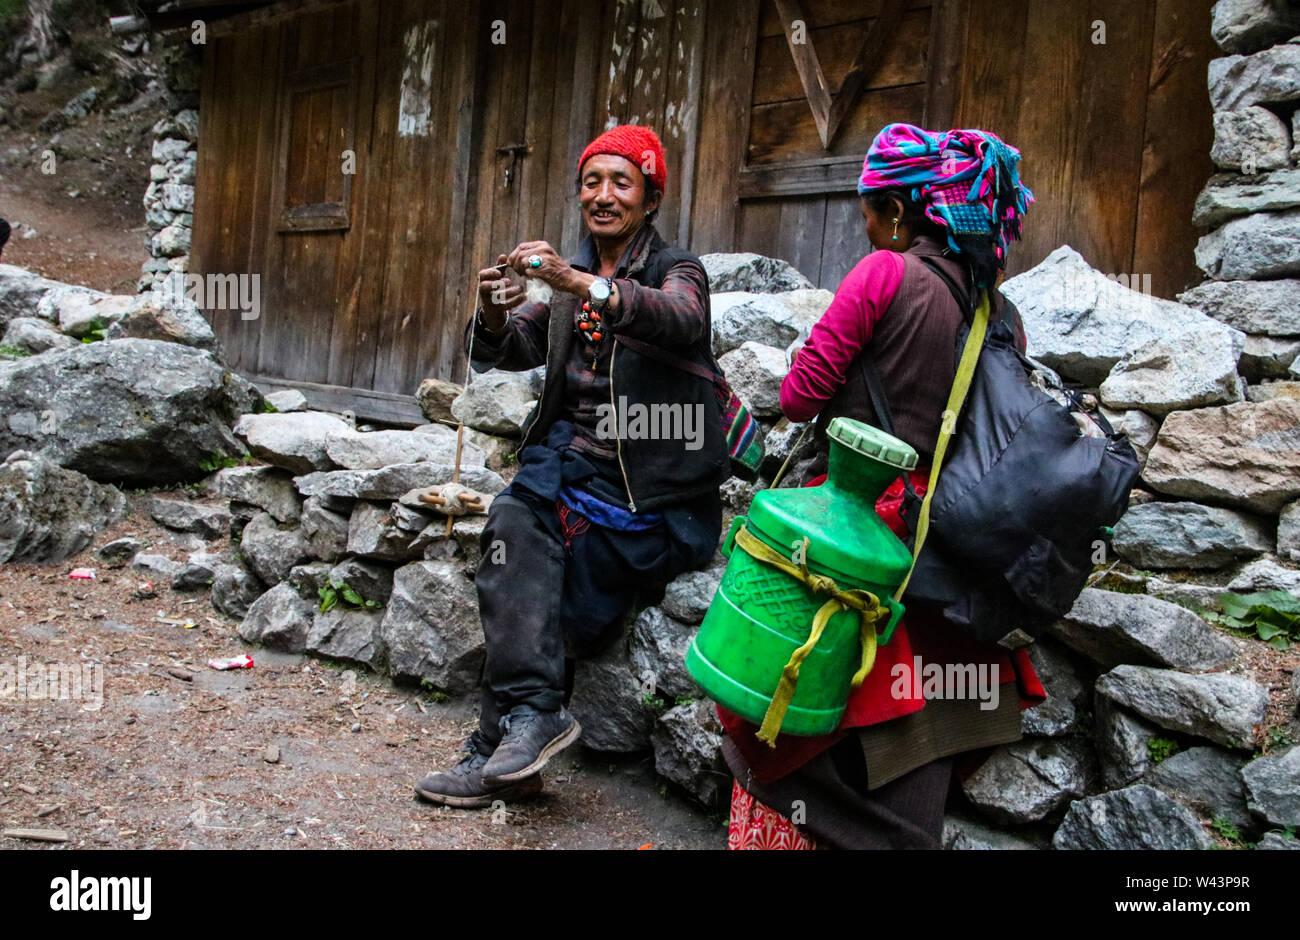 People of the Manaslu region preparing Yak wool for making clothes and handicrafts along the way to home. Stock Photo